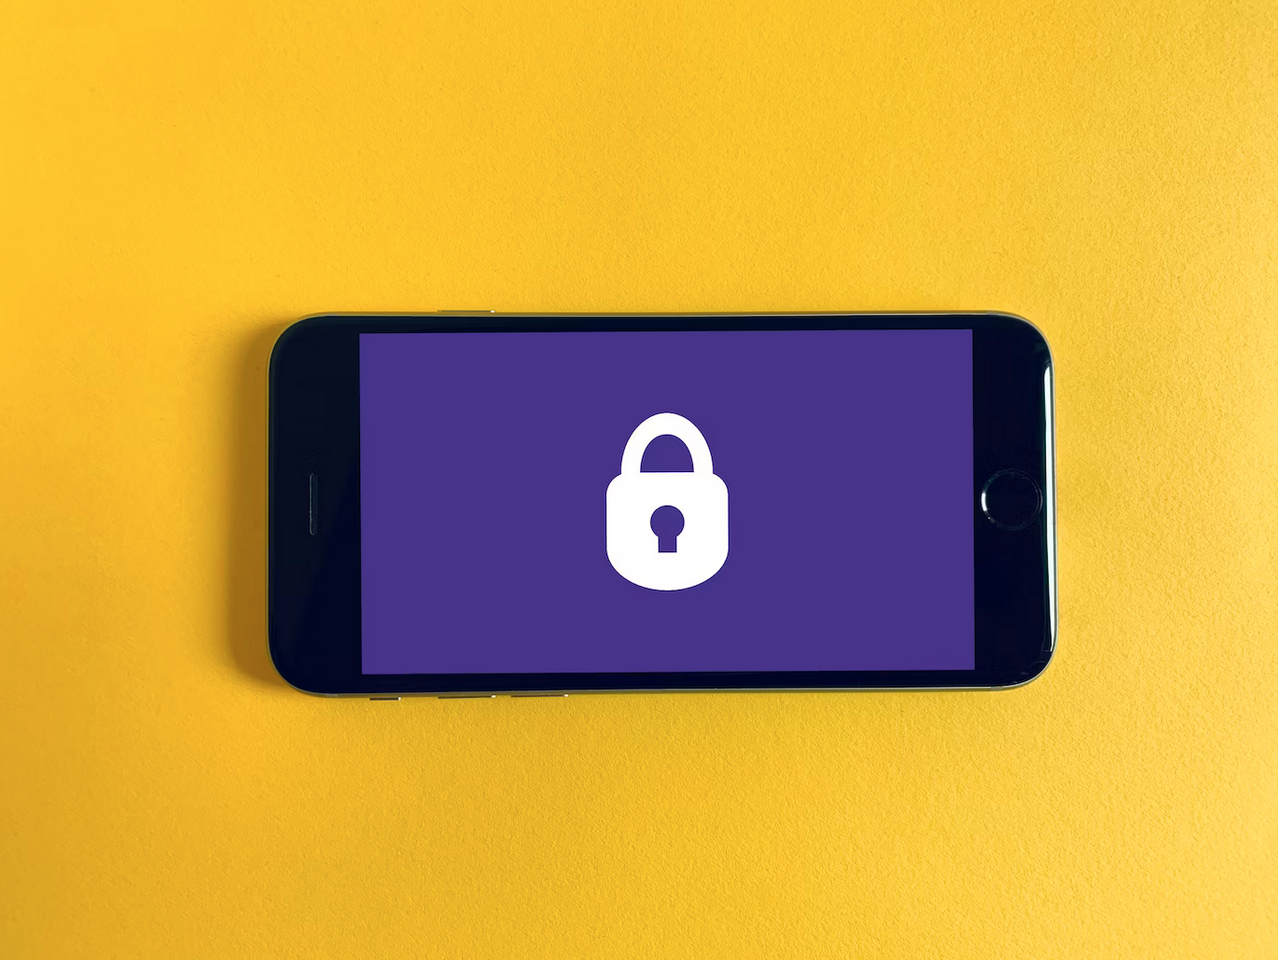 a iPhone in landscape view displaying an image of a white lock icon on a purple background